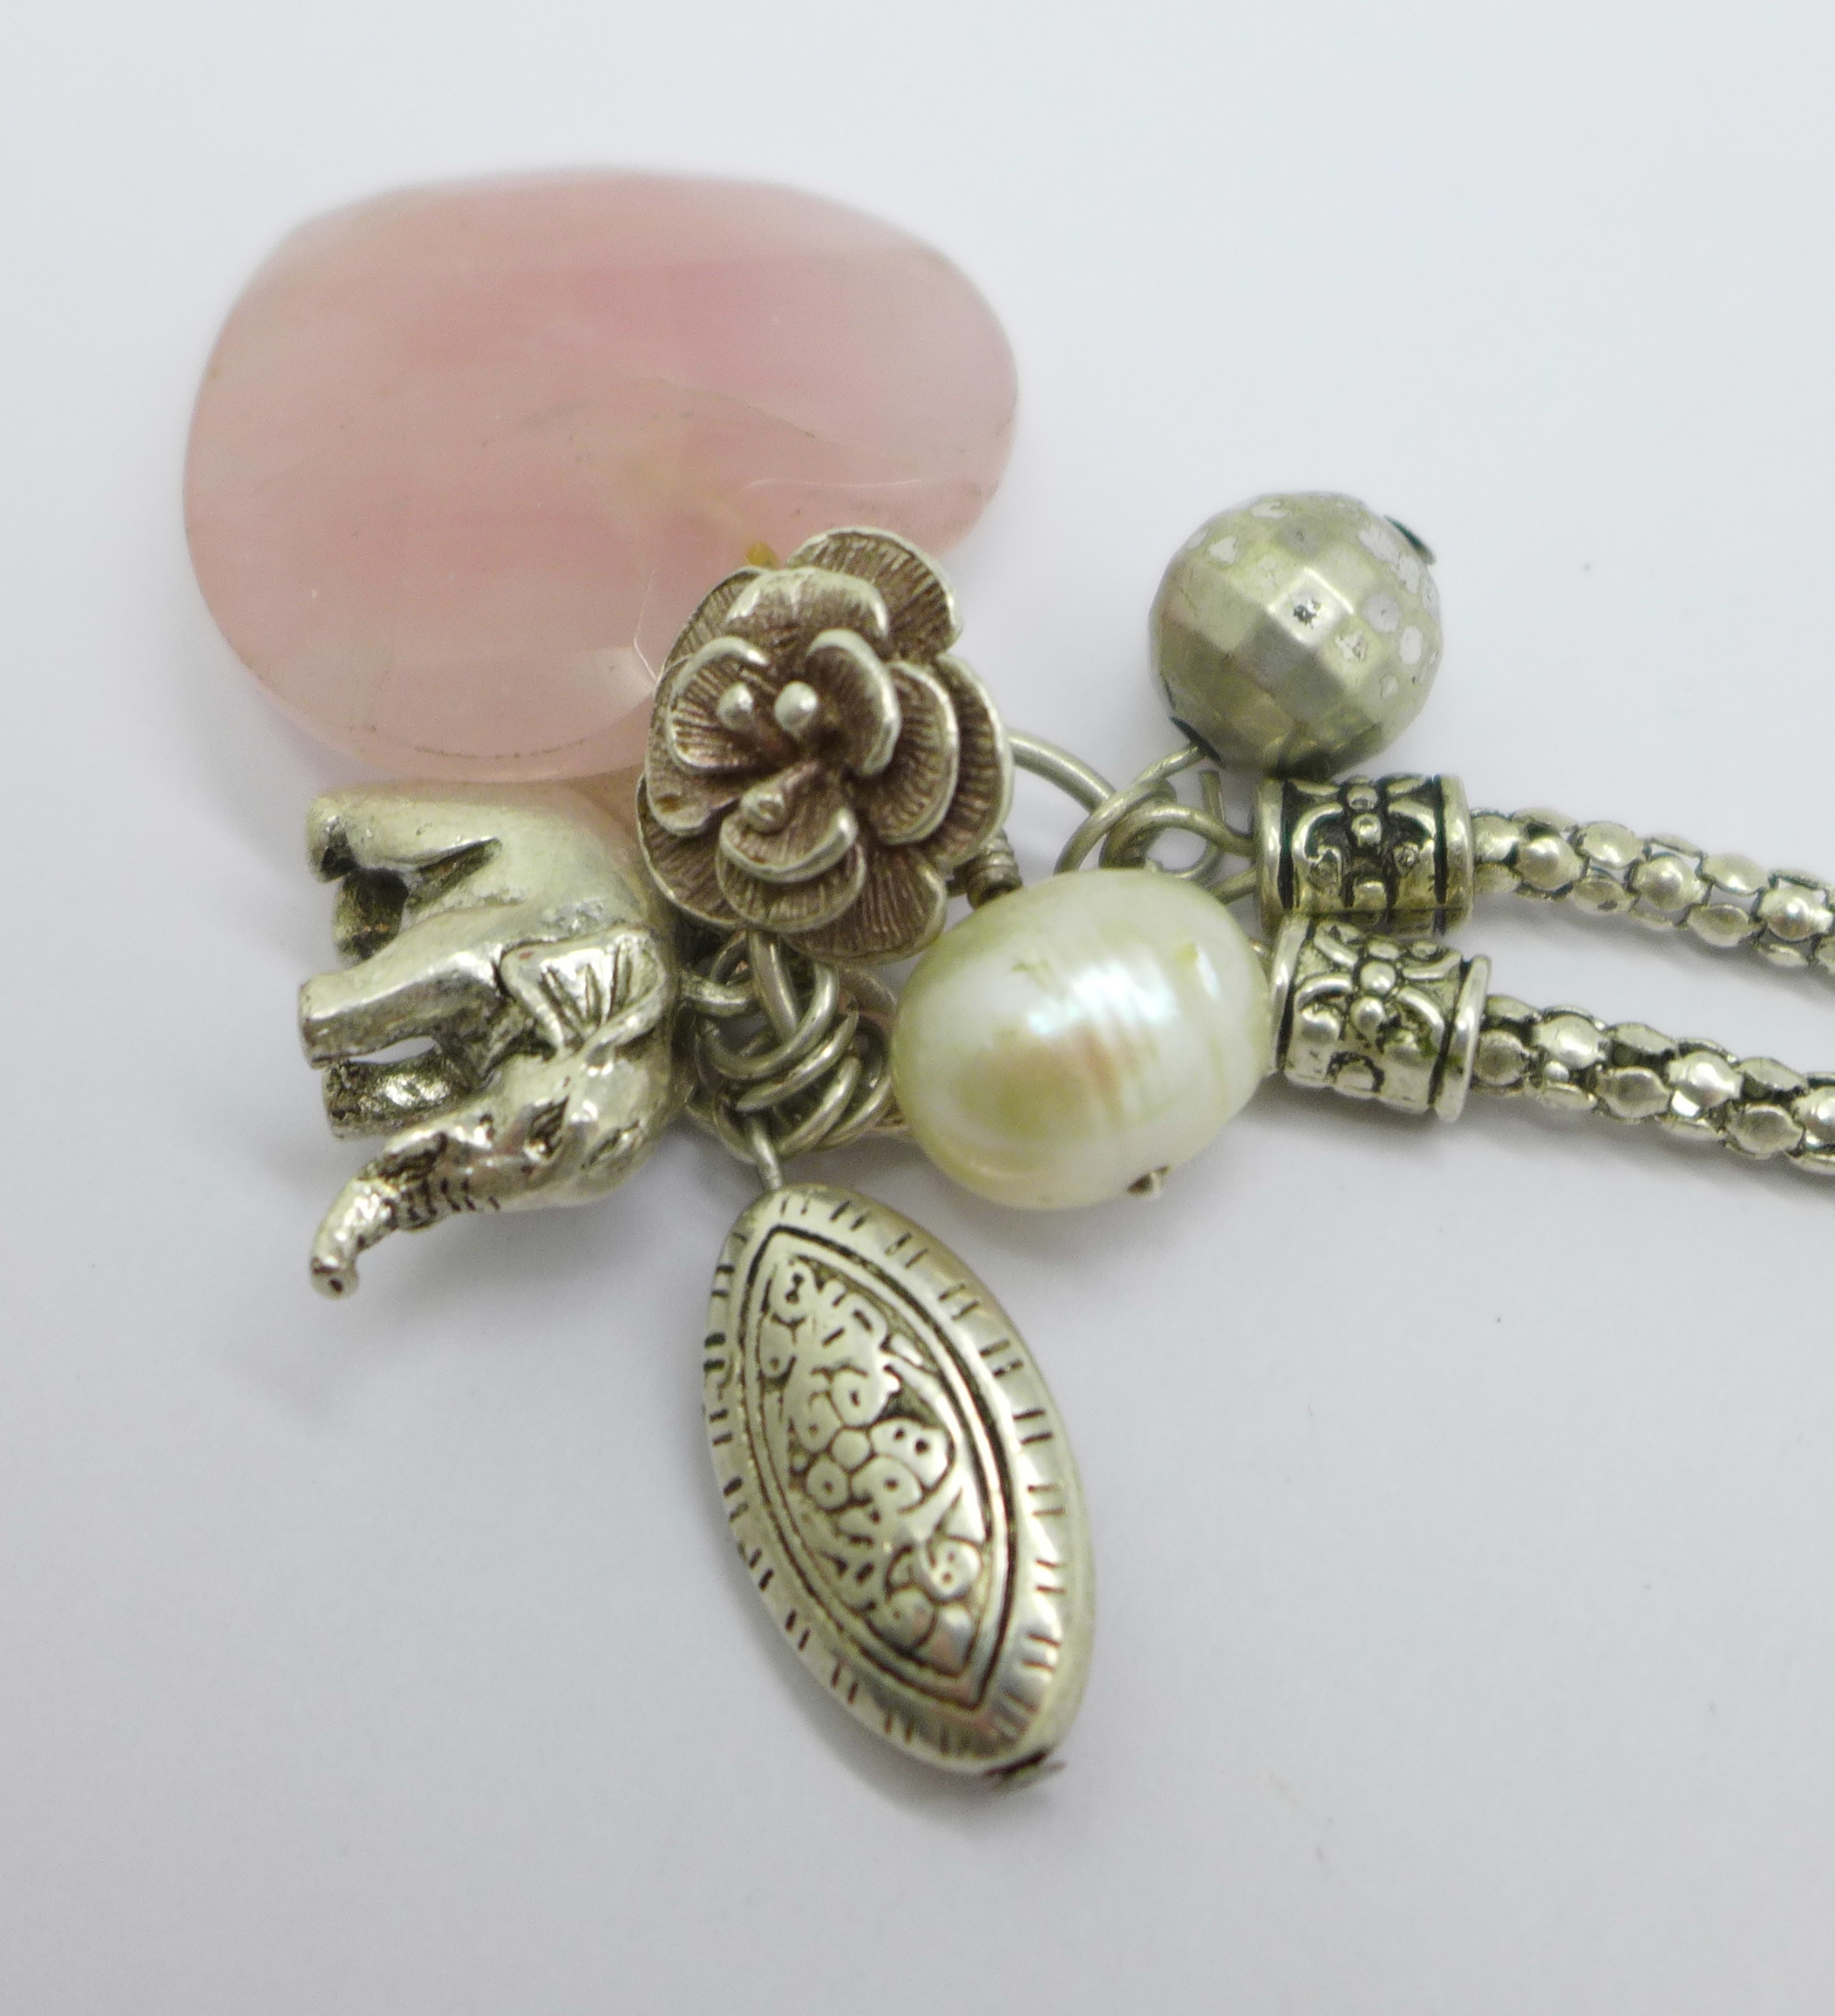 An Azuni designer necklace with pink quartz, baroque pearl and charms - Image 3 of 3